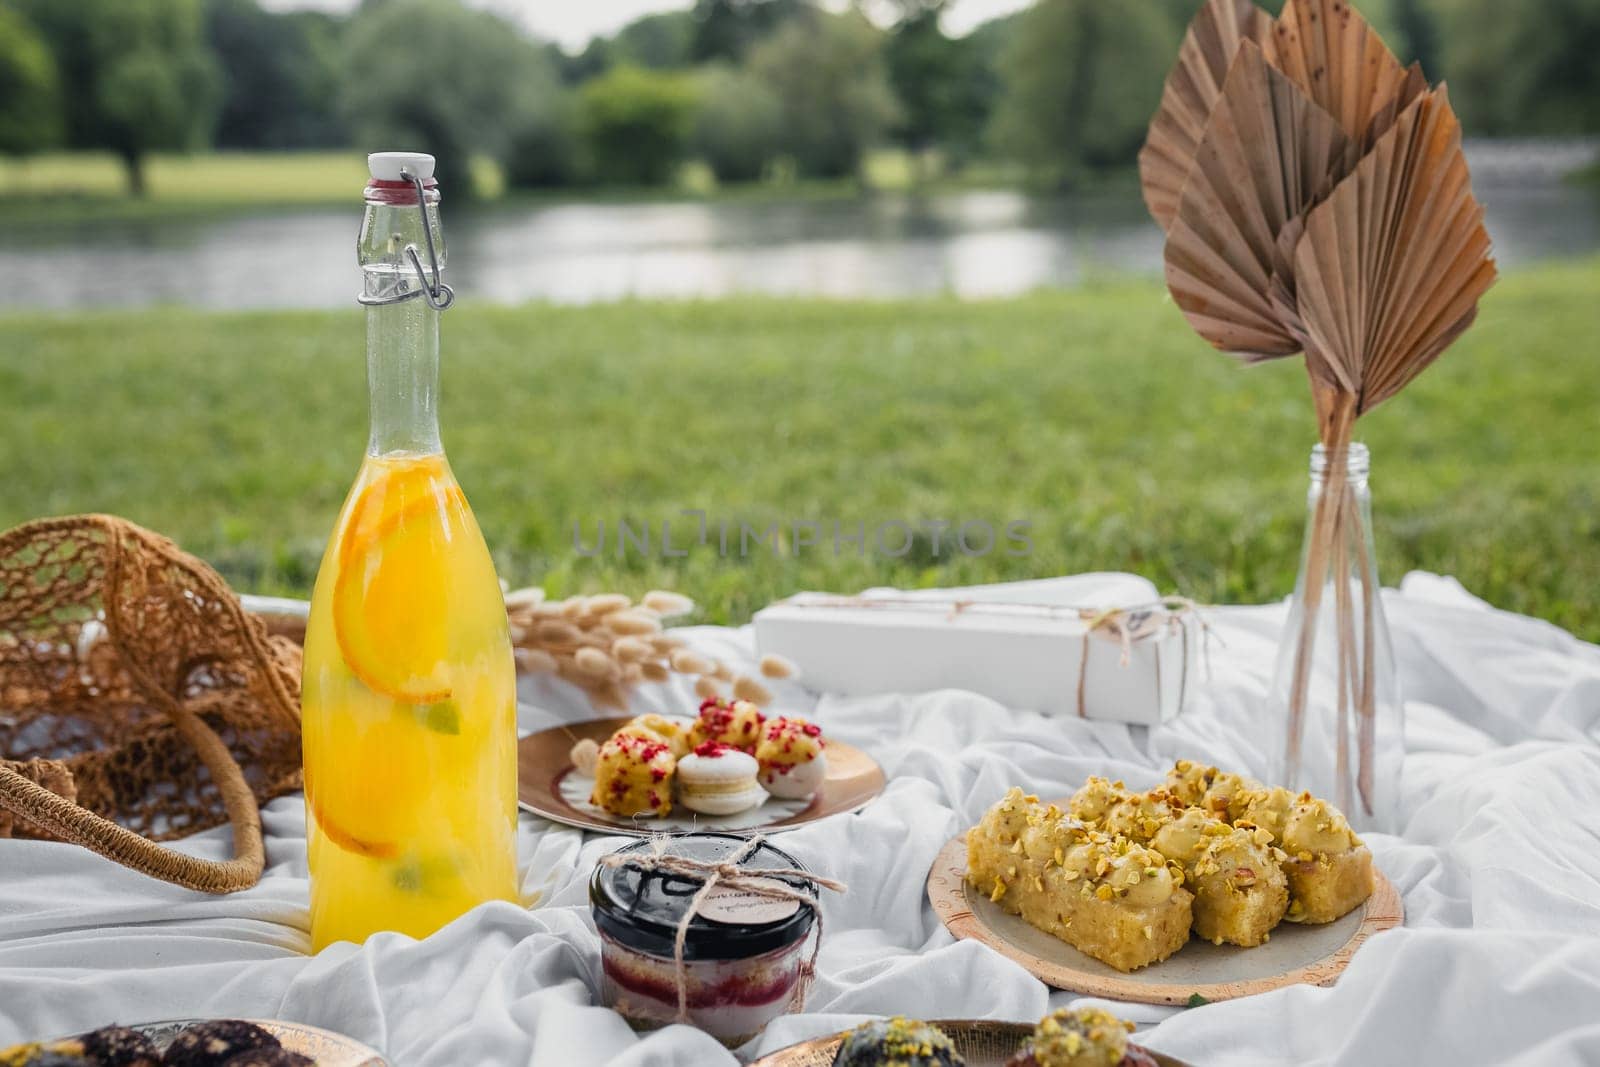 A picnic basket overflowing with delectable food and drinks, ready for a relaxing outdoor meal in nature.